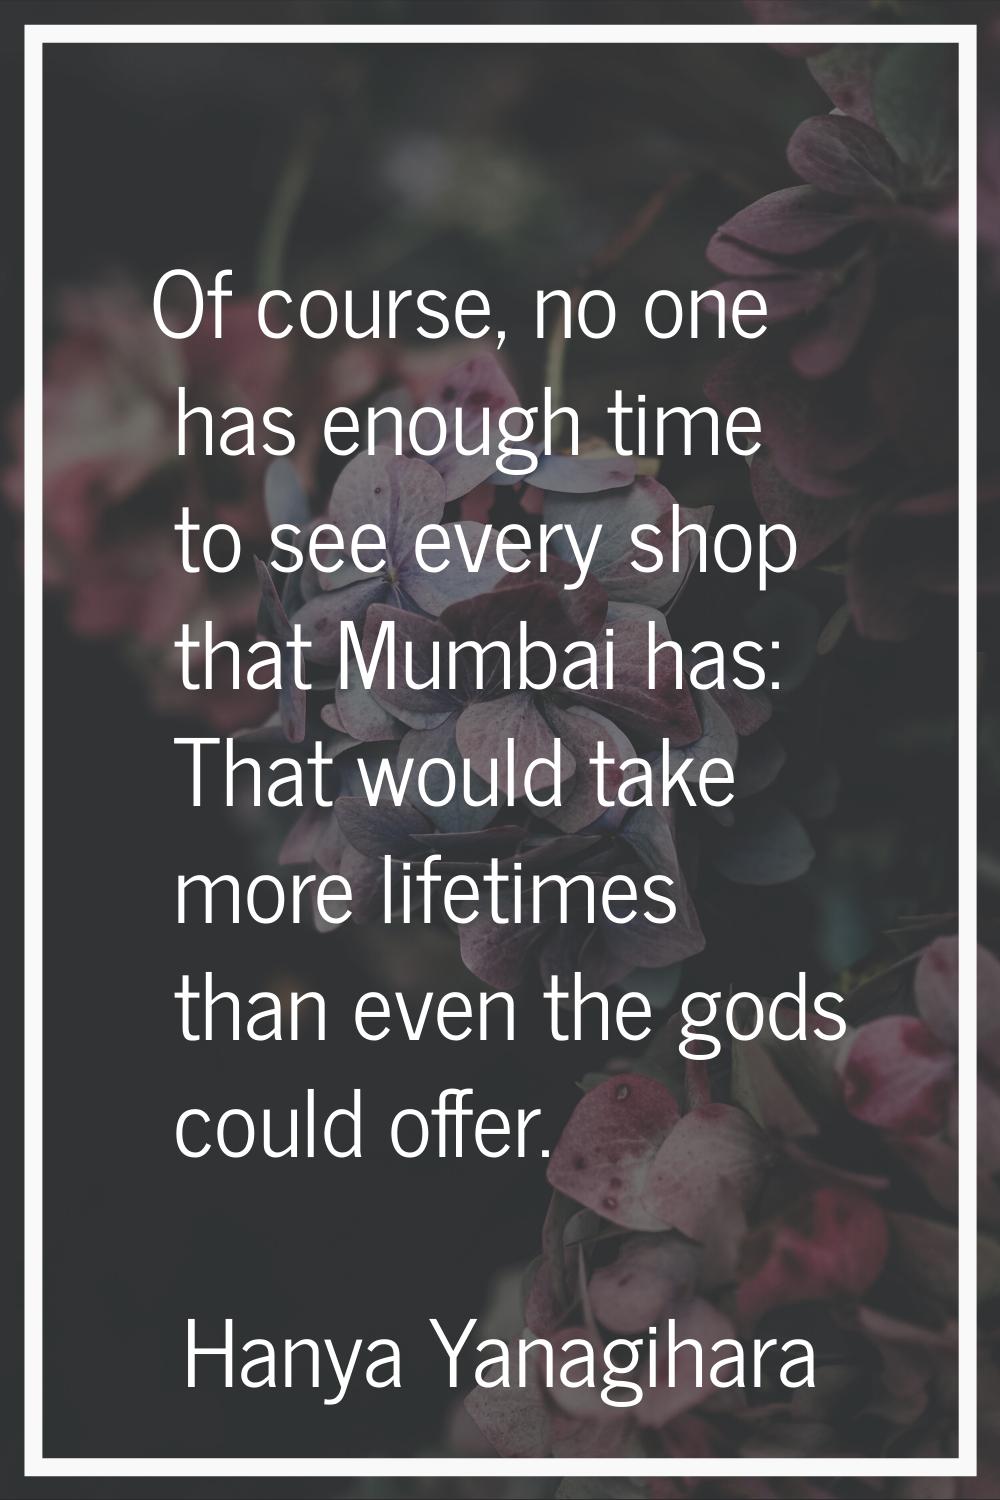 Of course, no one has enough time to see every shop that Mumbai has: That would take more lifetimes